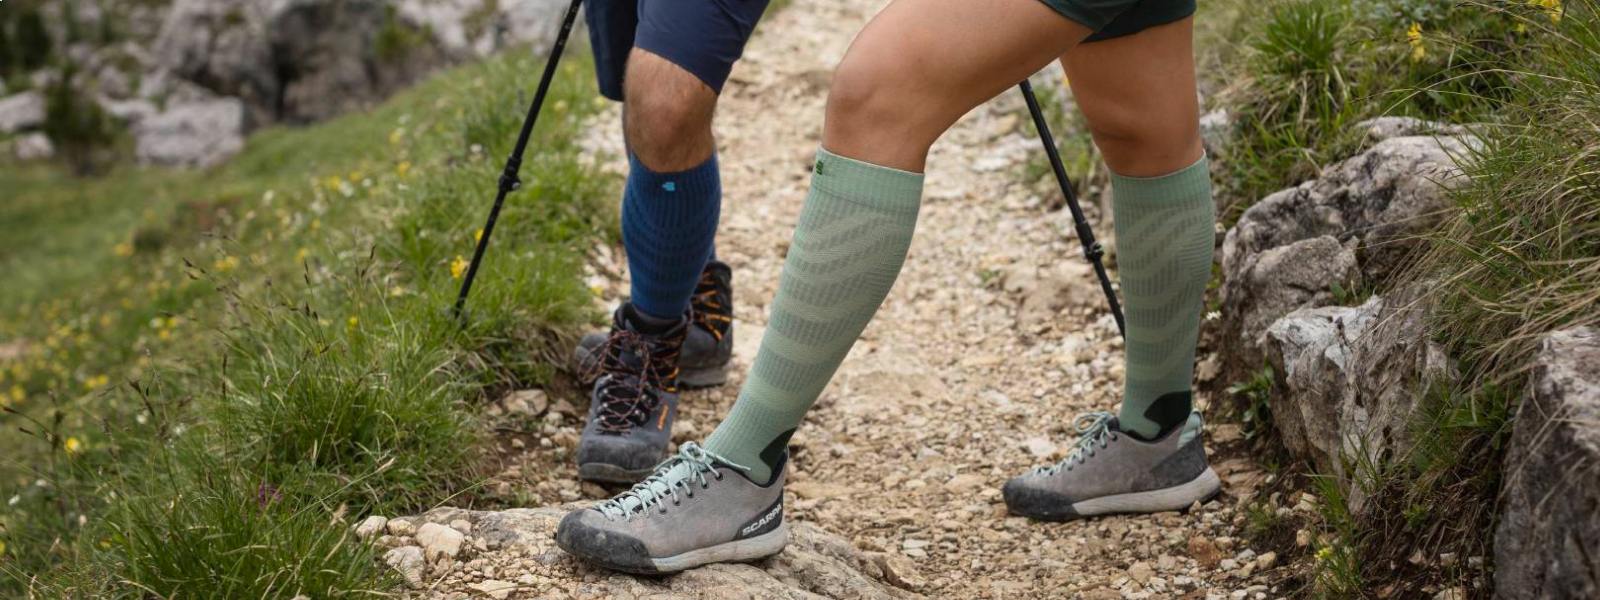 Extract of four legs with merciful Merino hiking socks on a hiking trail